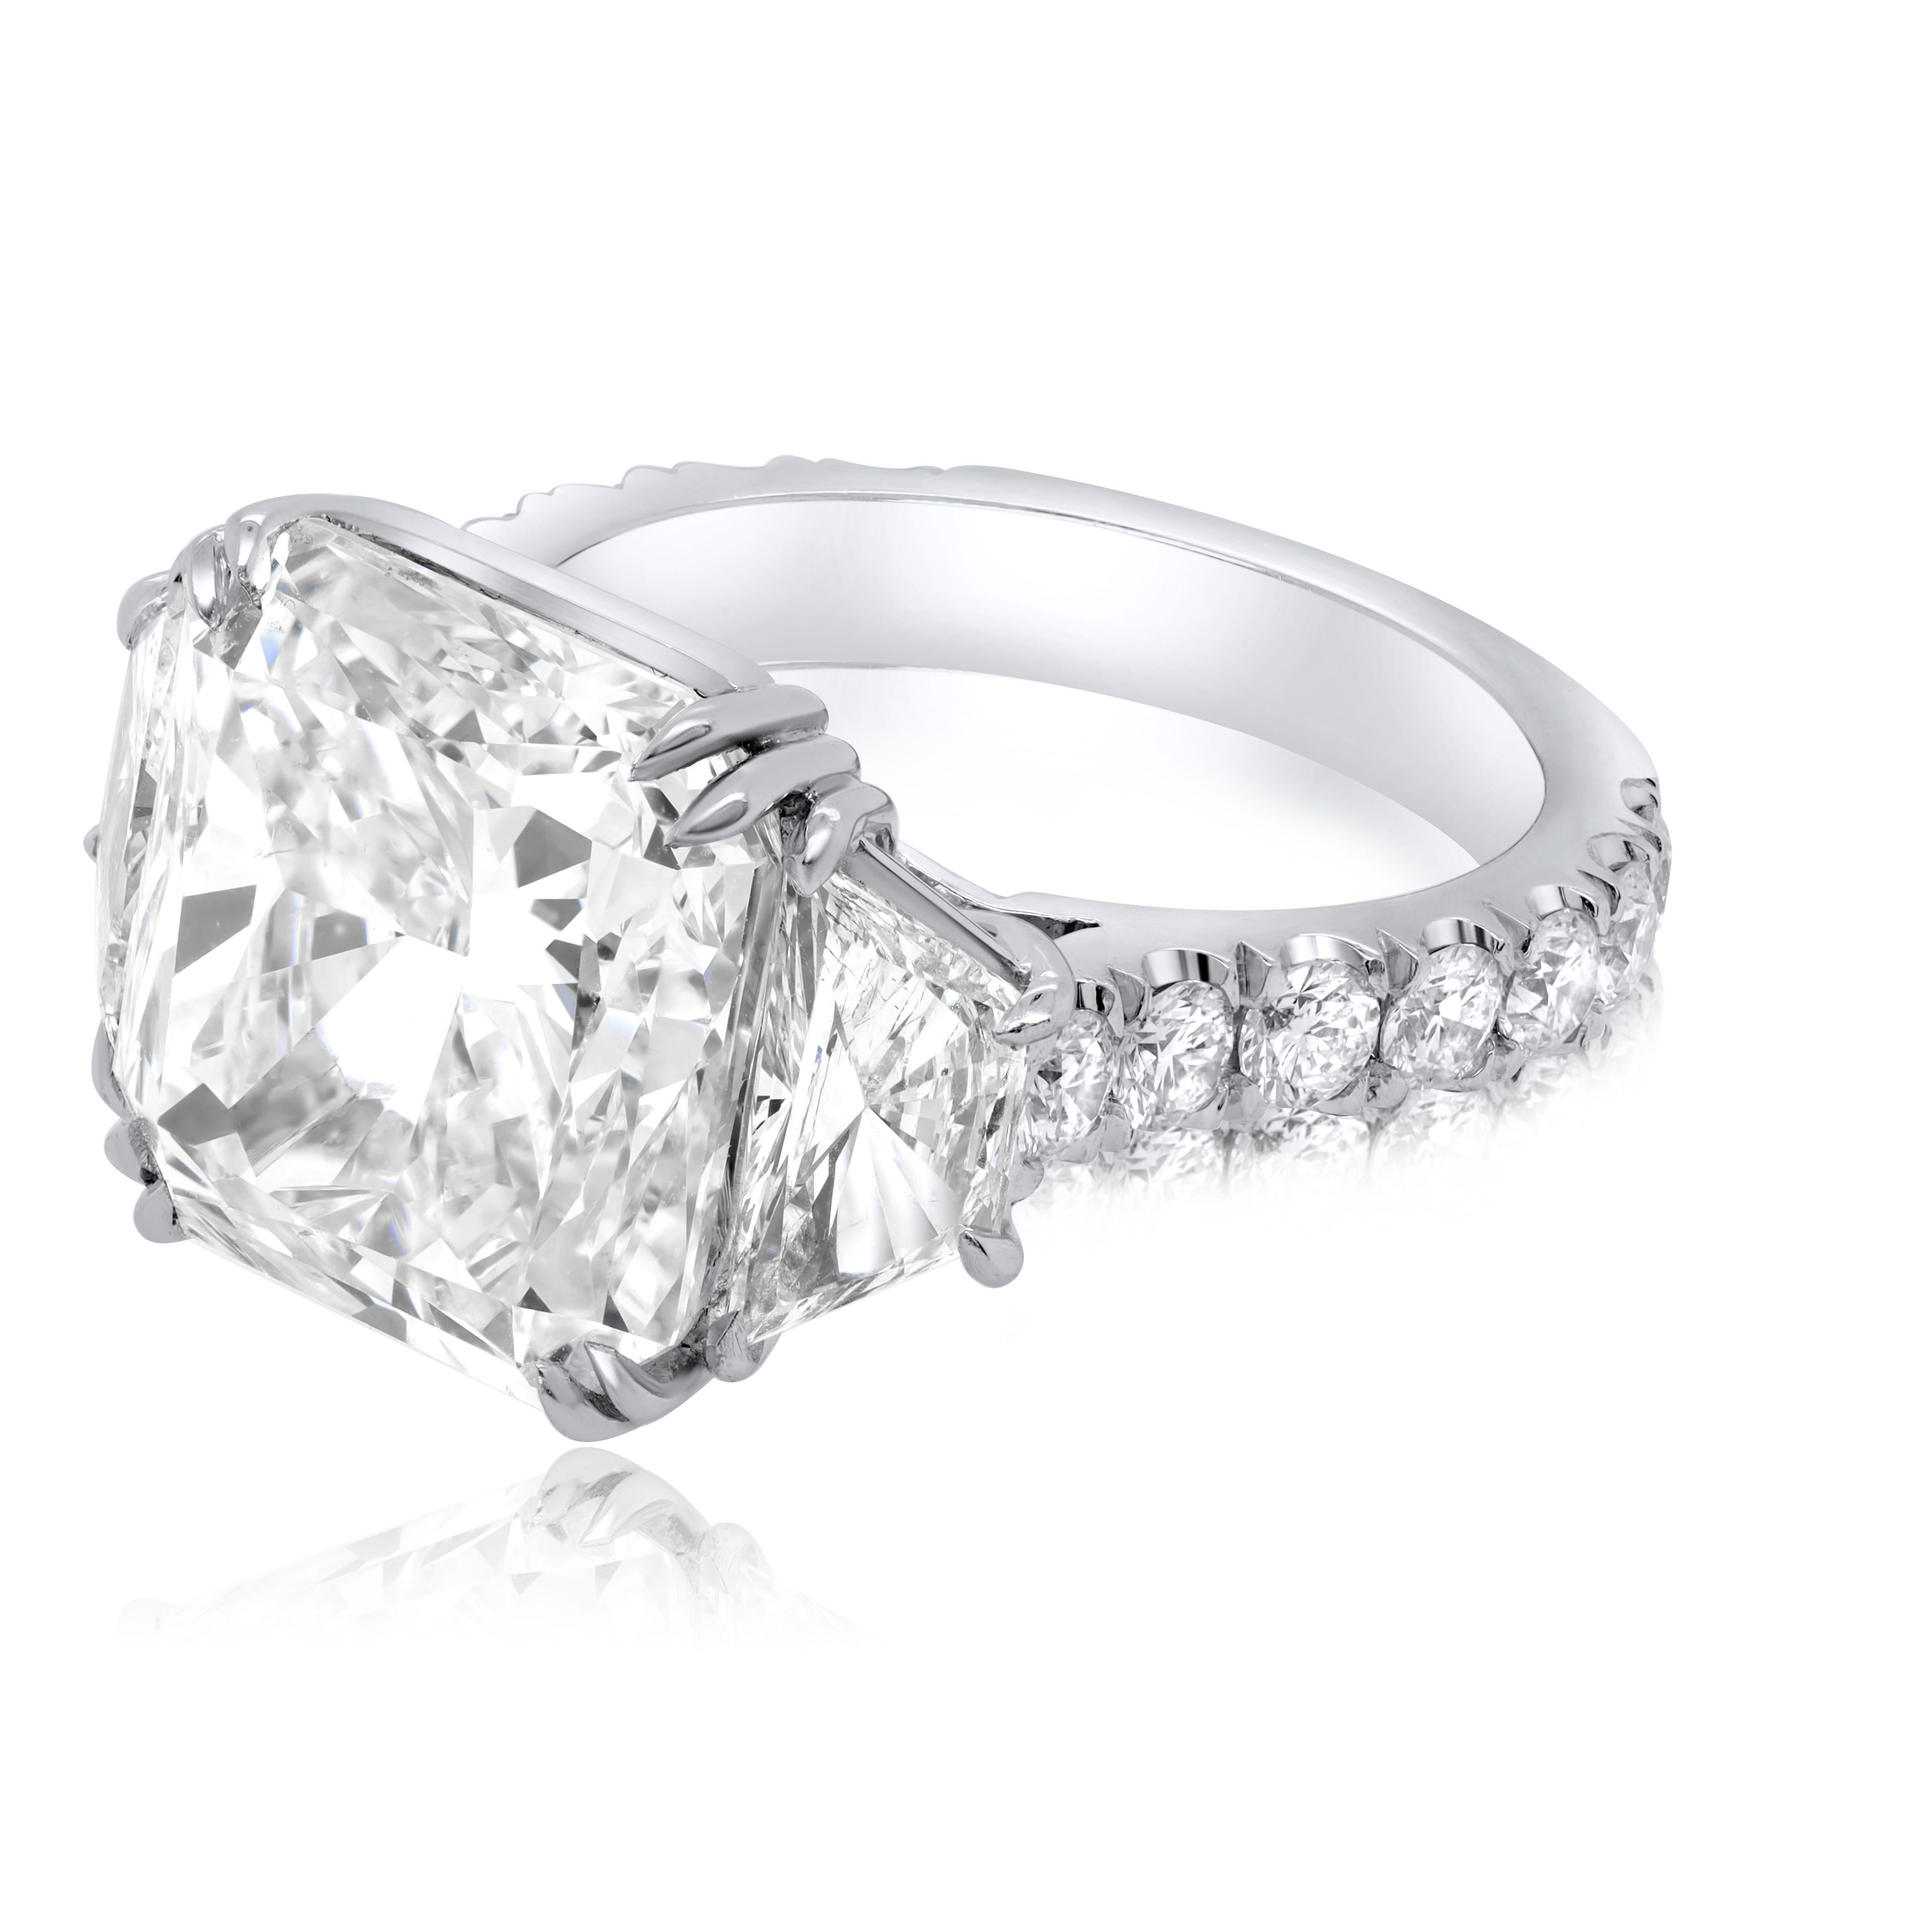 GIA Certified 10.08 Carat Radiant Cut Diamond Ring In New Condition For Sale In New York, NY